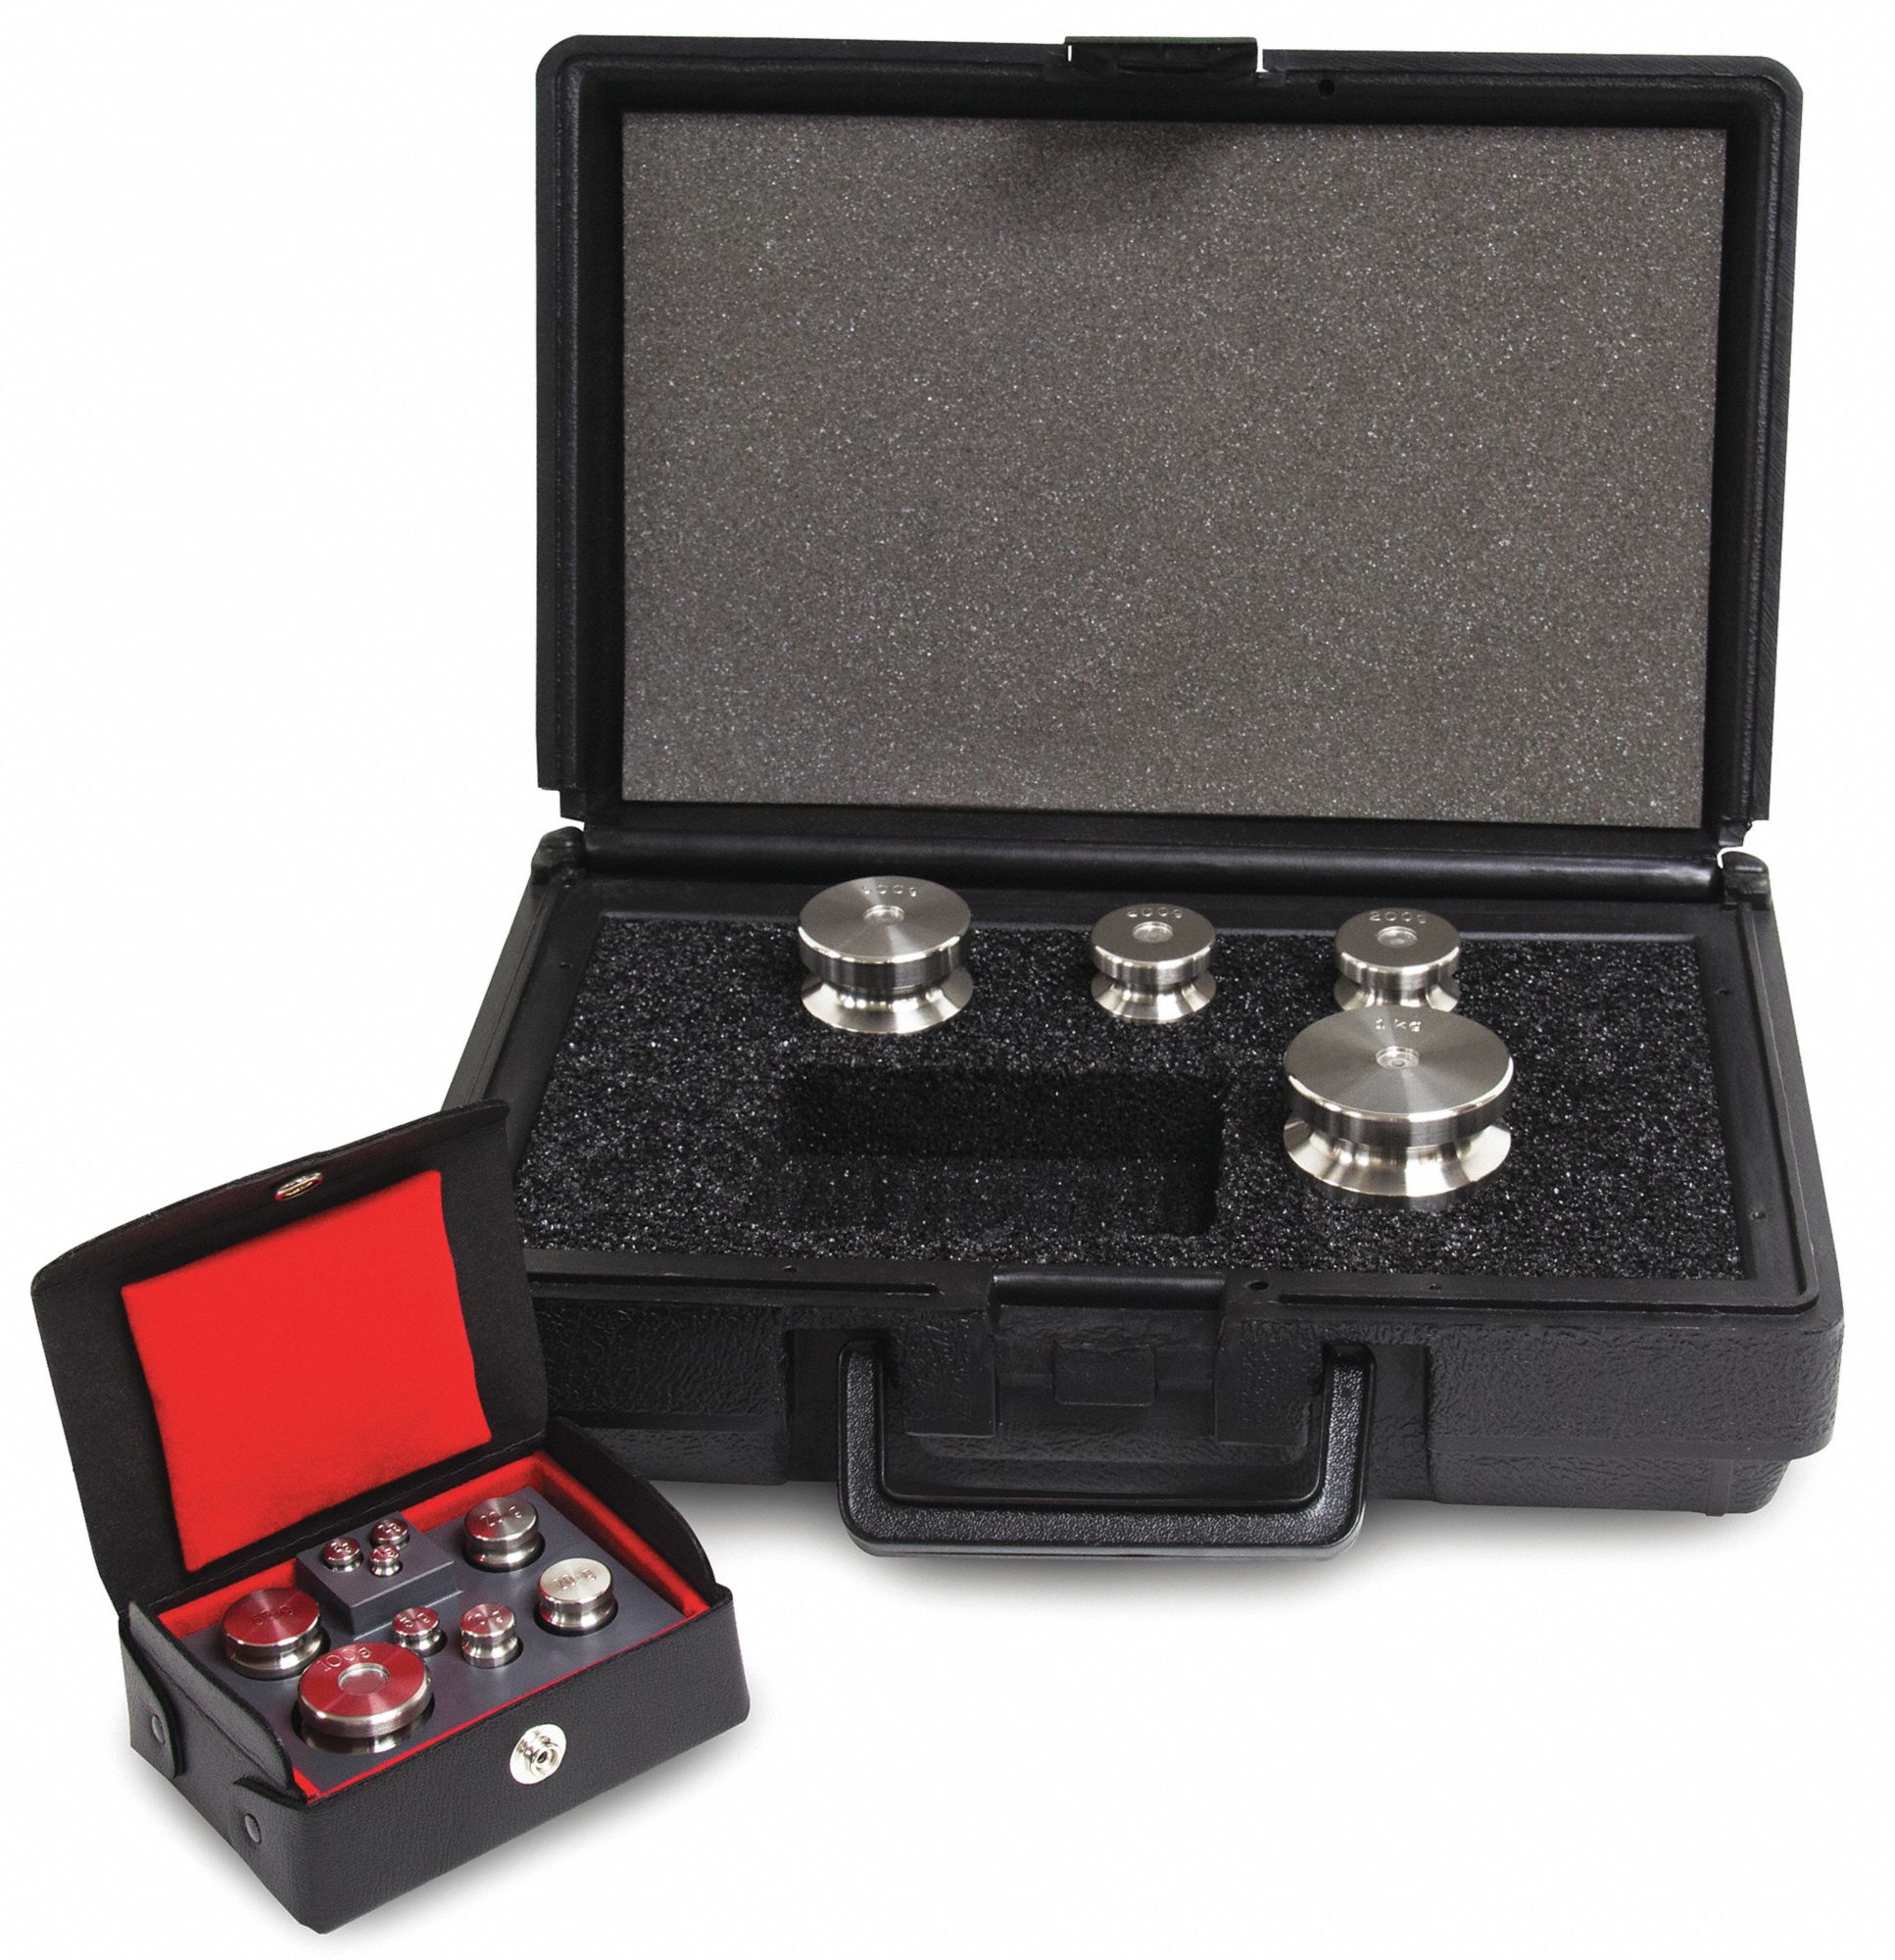 RELOADING SCALE CALIBRATION KIT WITH 6 WEIGHTS IN A STORAGE CASE WITH 5PC MEASU 